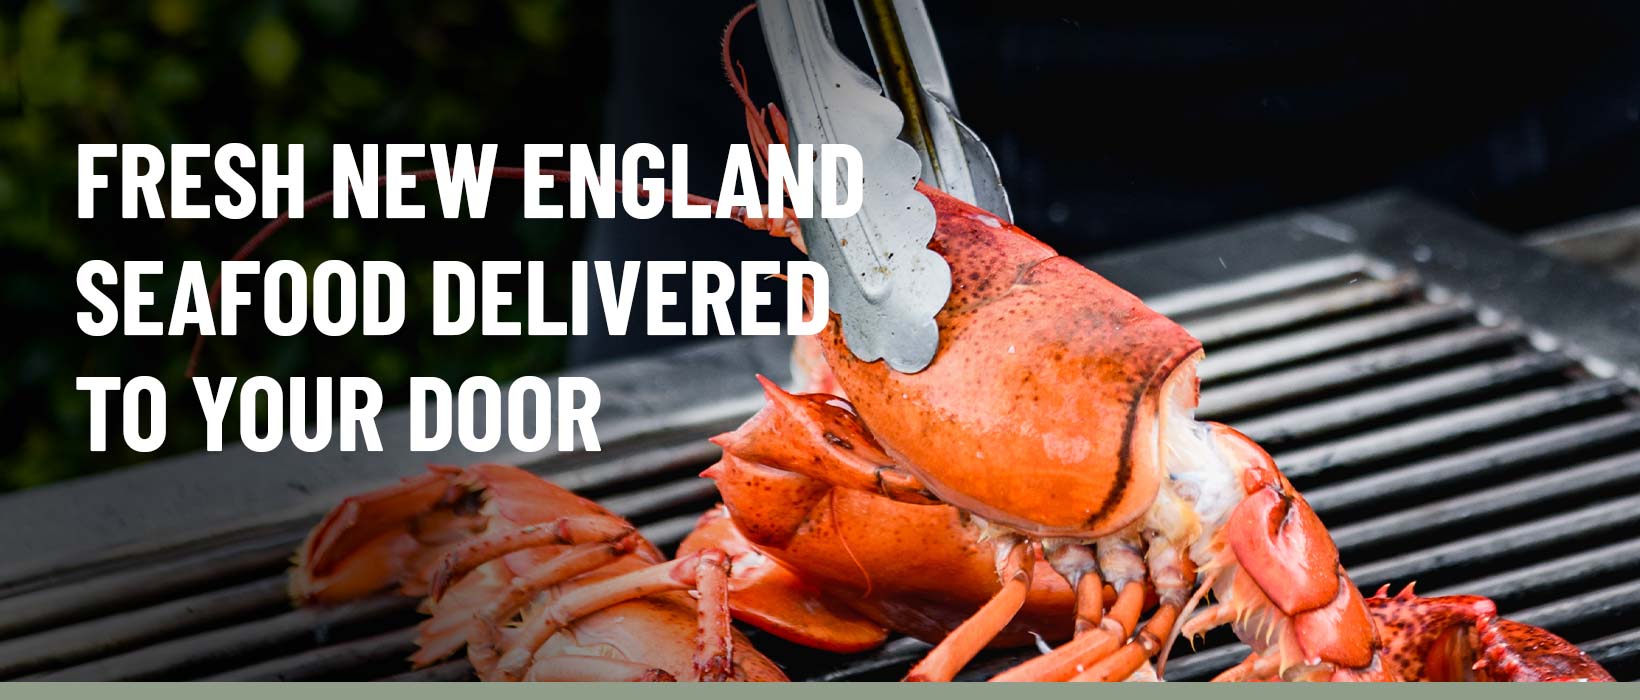 Lobsters Online - Fresh, Live Lobsters Shipped Daily